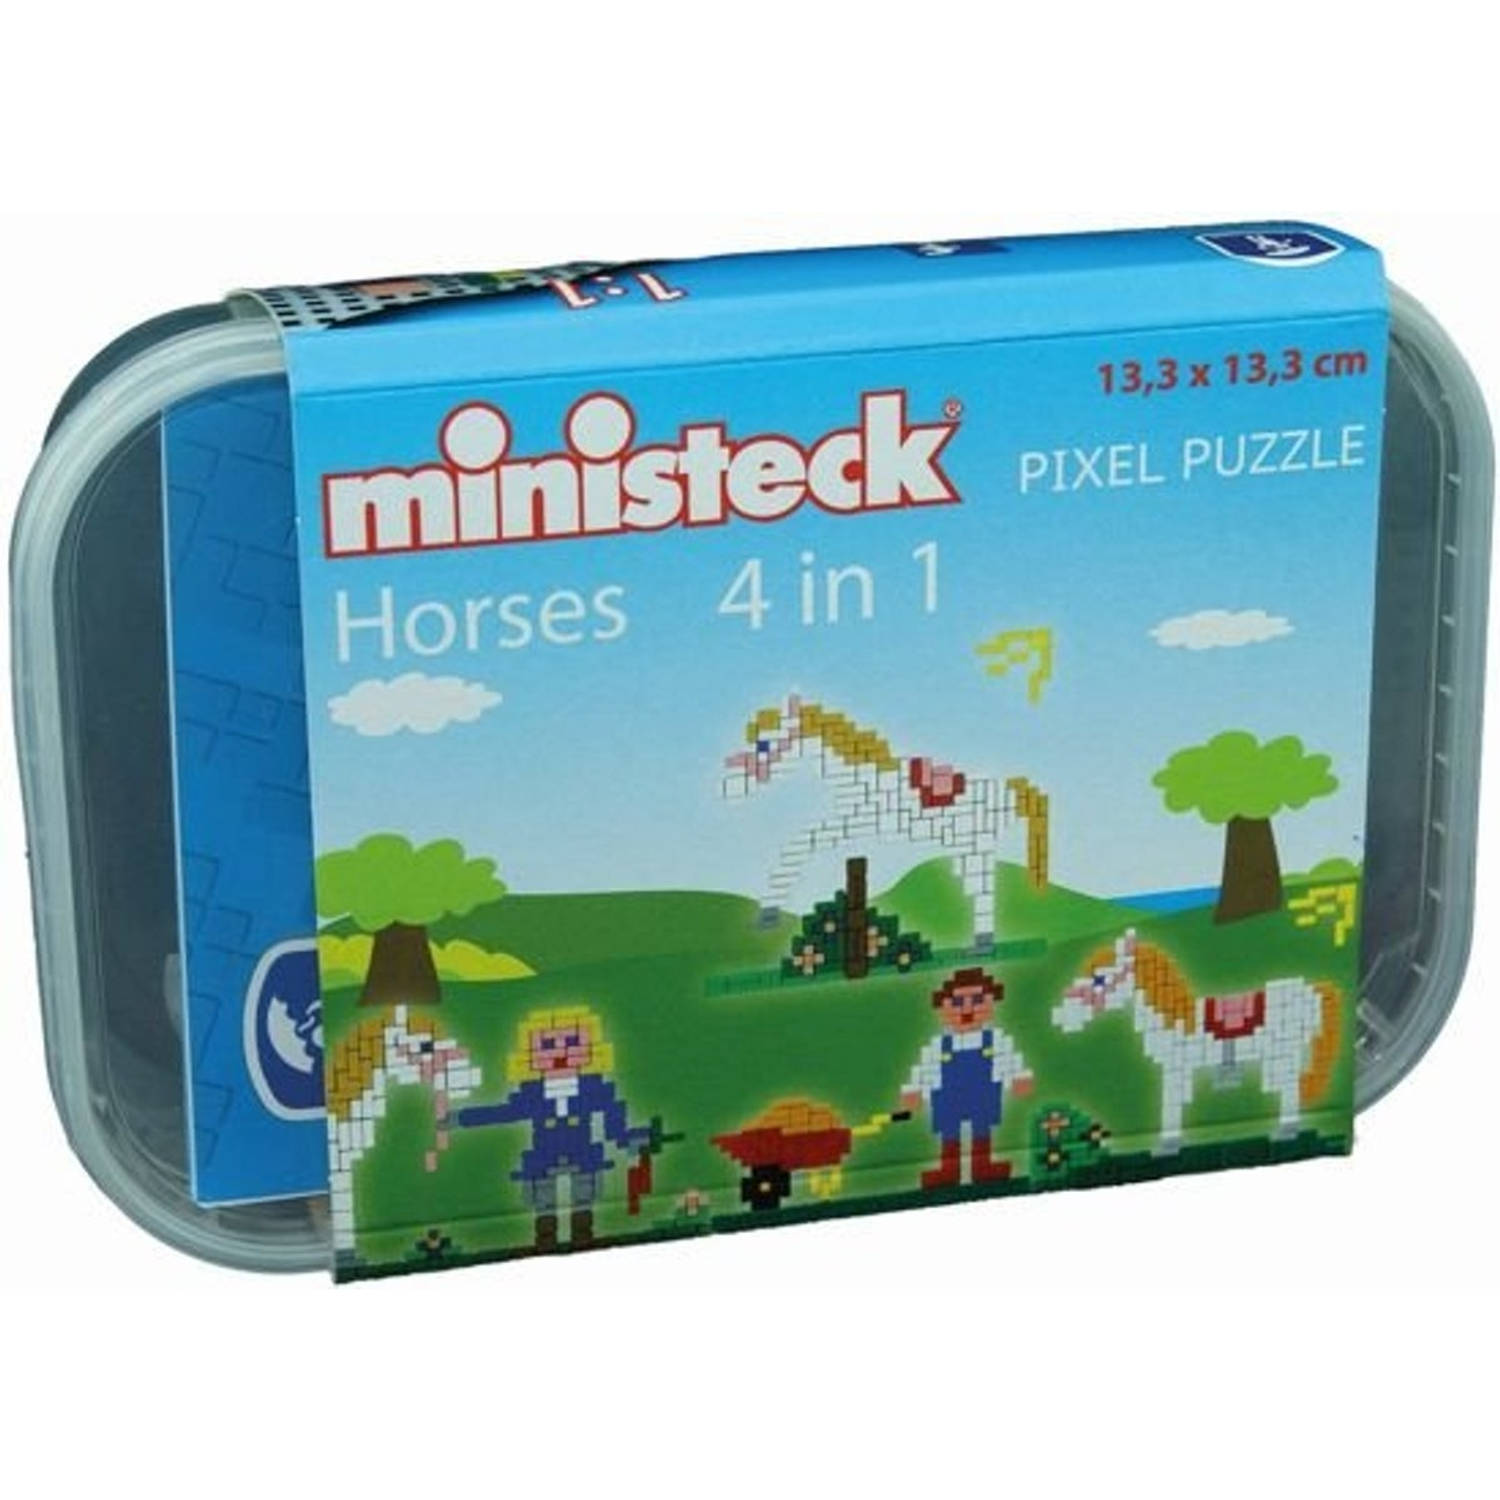 Ministeck paarden box 4 in 1 500 delig